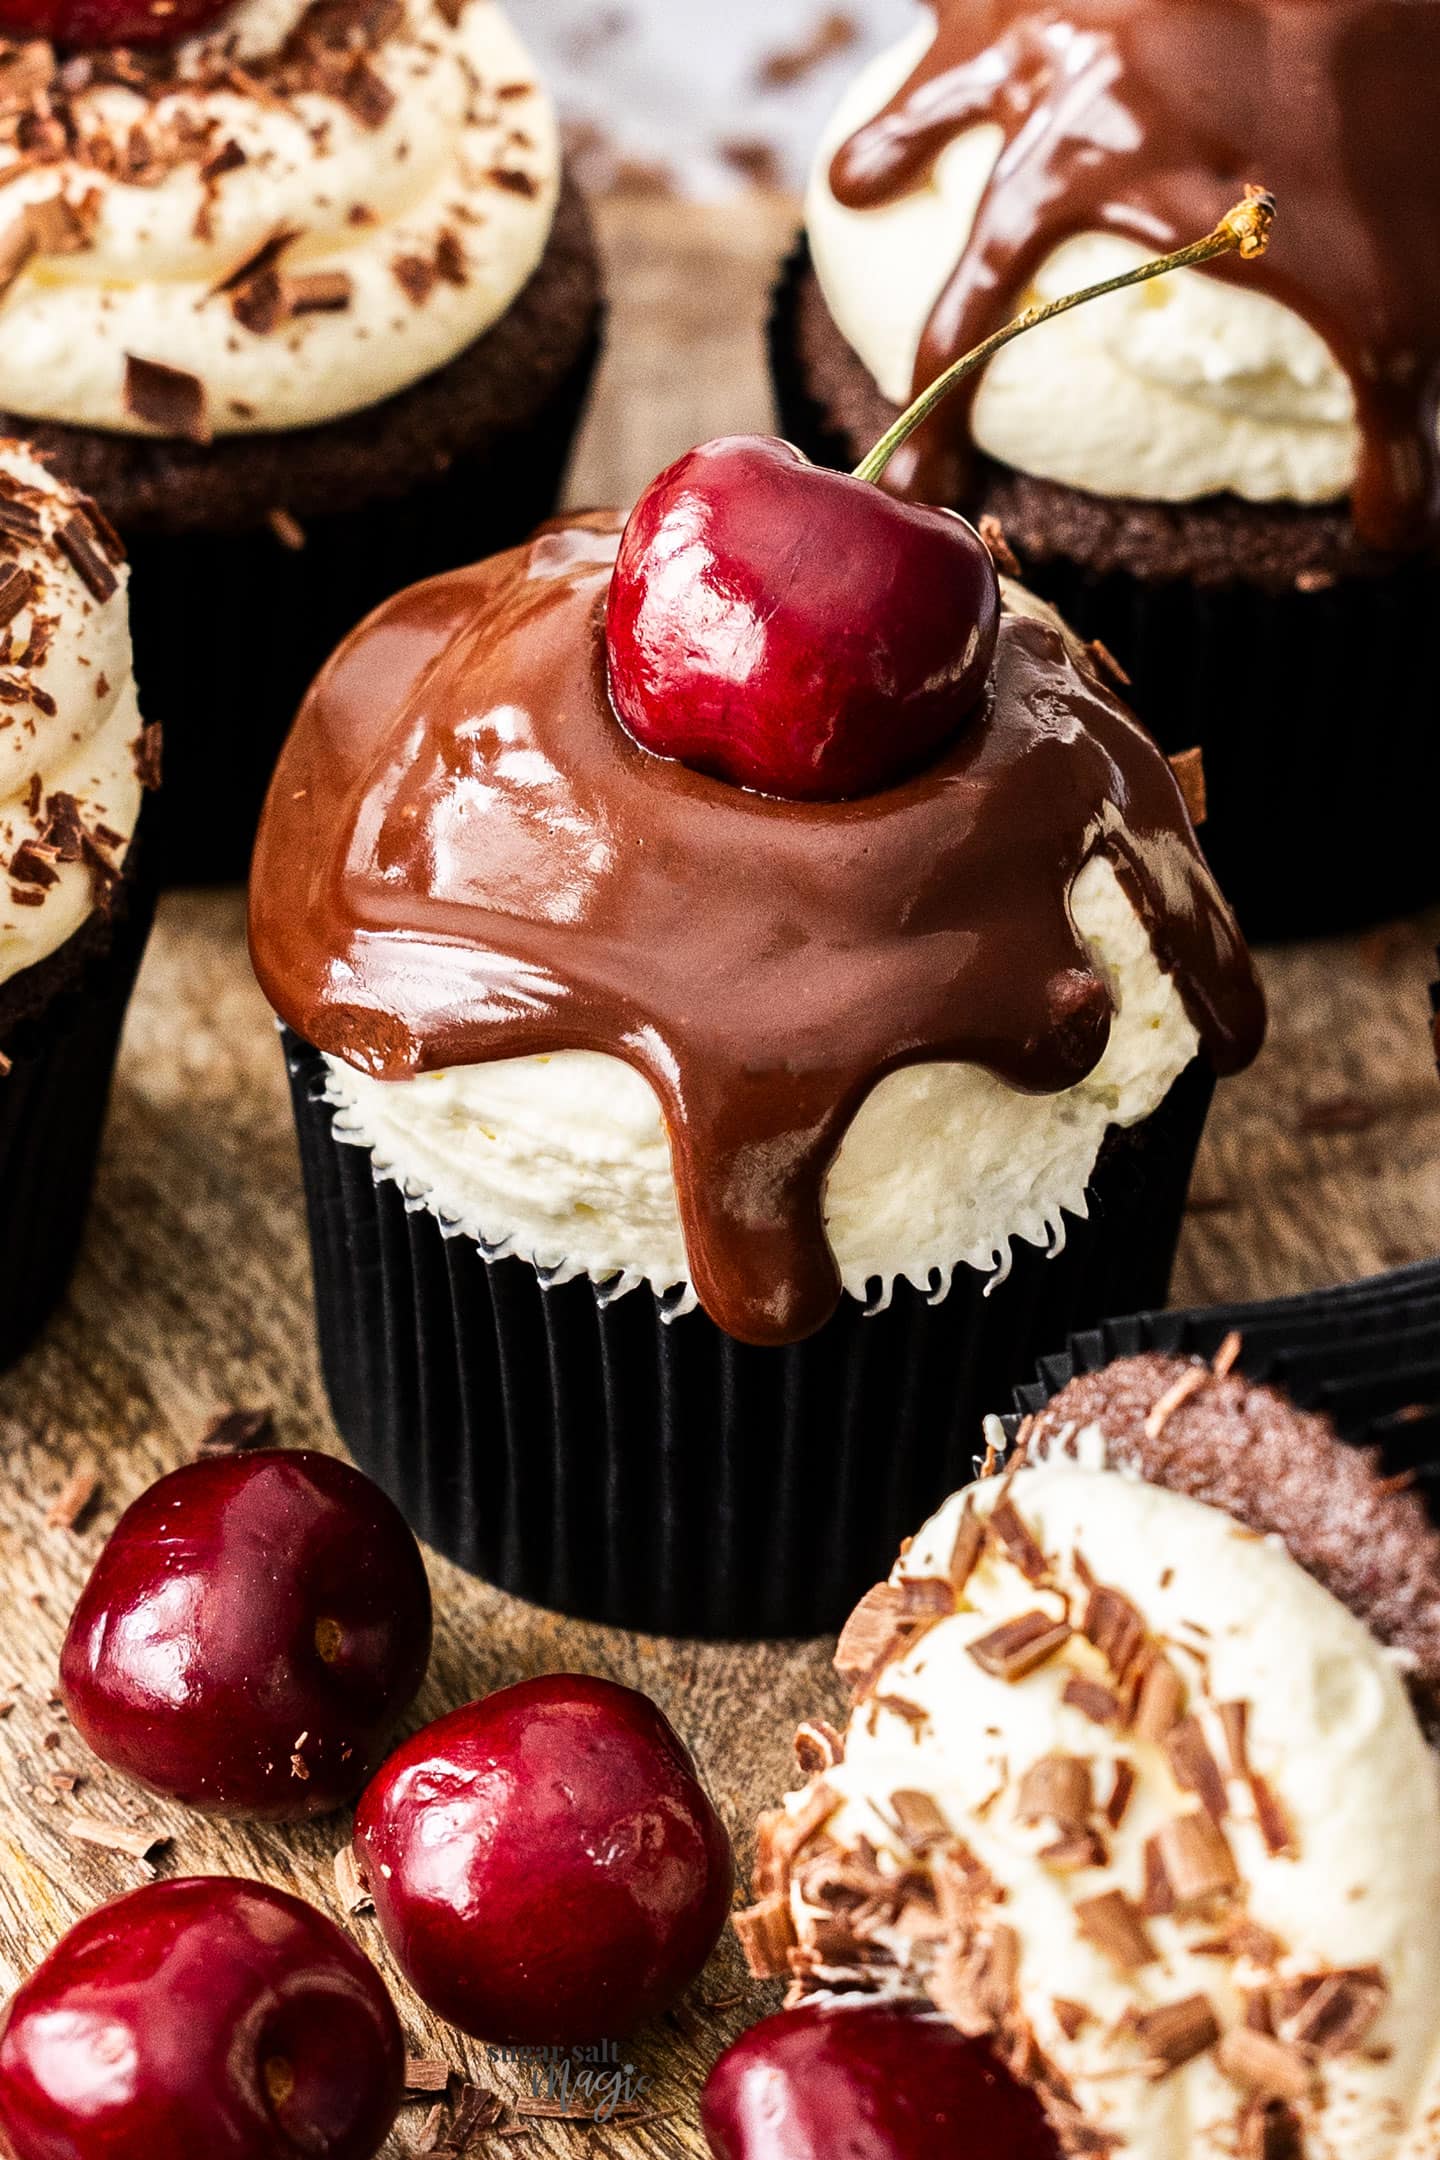 Closeup of a single cupcake with a fresh cherry on top.